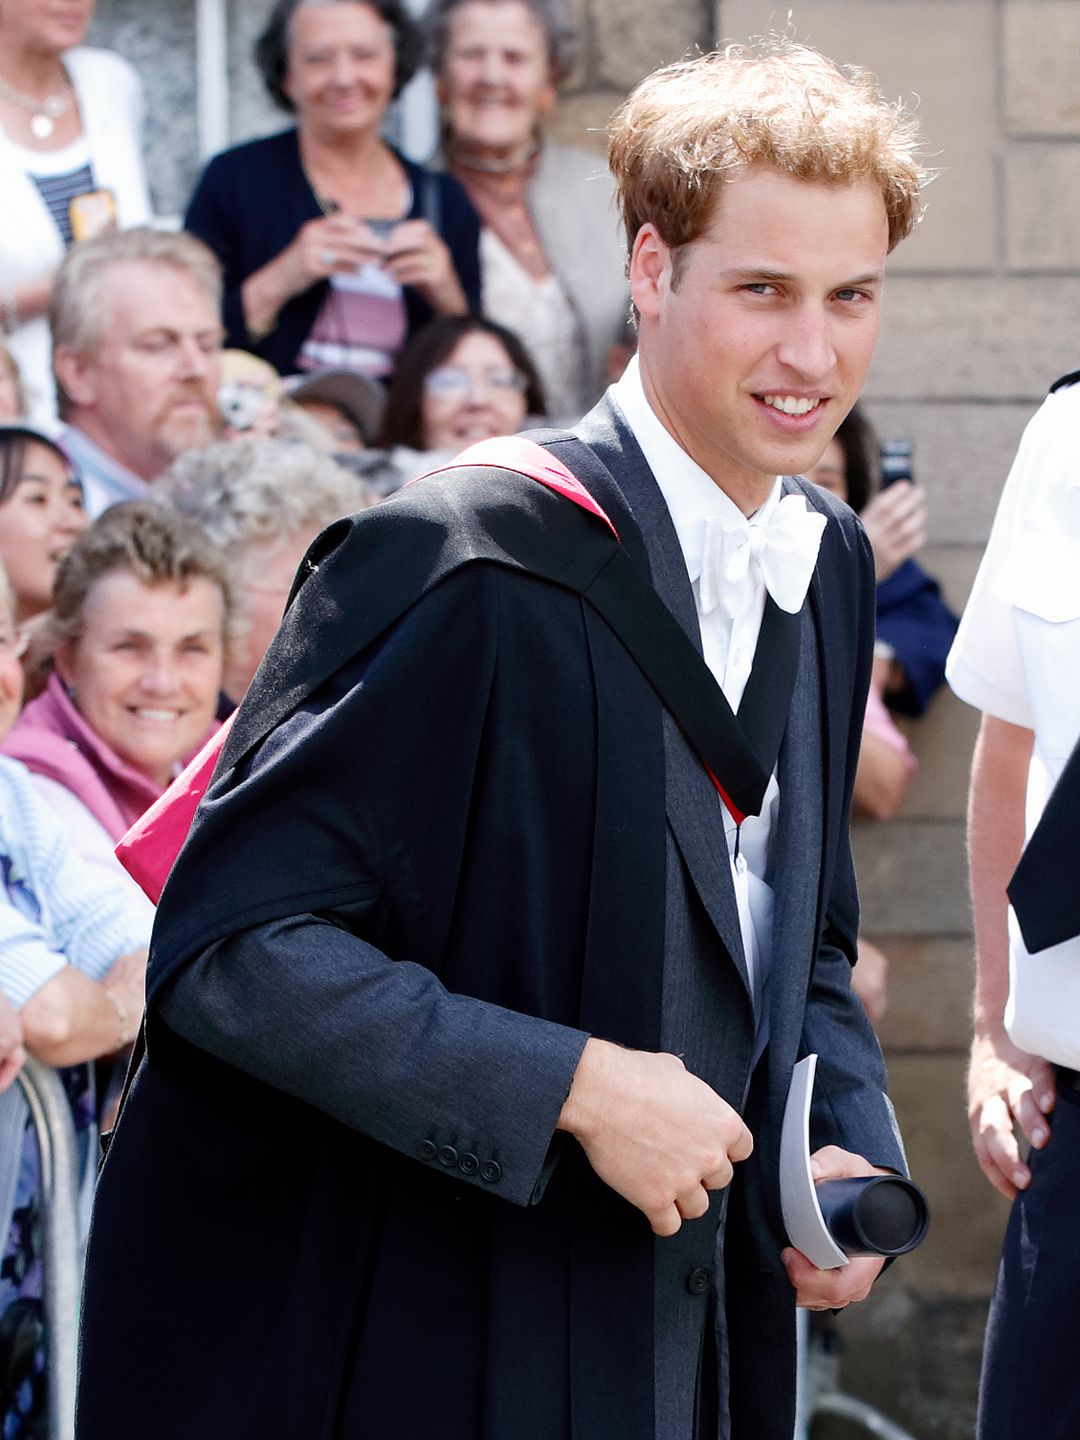 Prince William attends his graduation ceremony at the University of St. Andrews on June 23, 2005